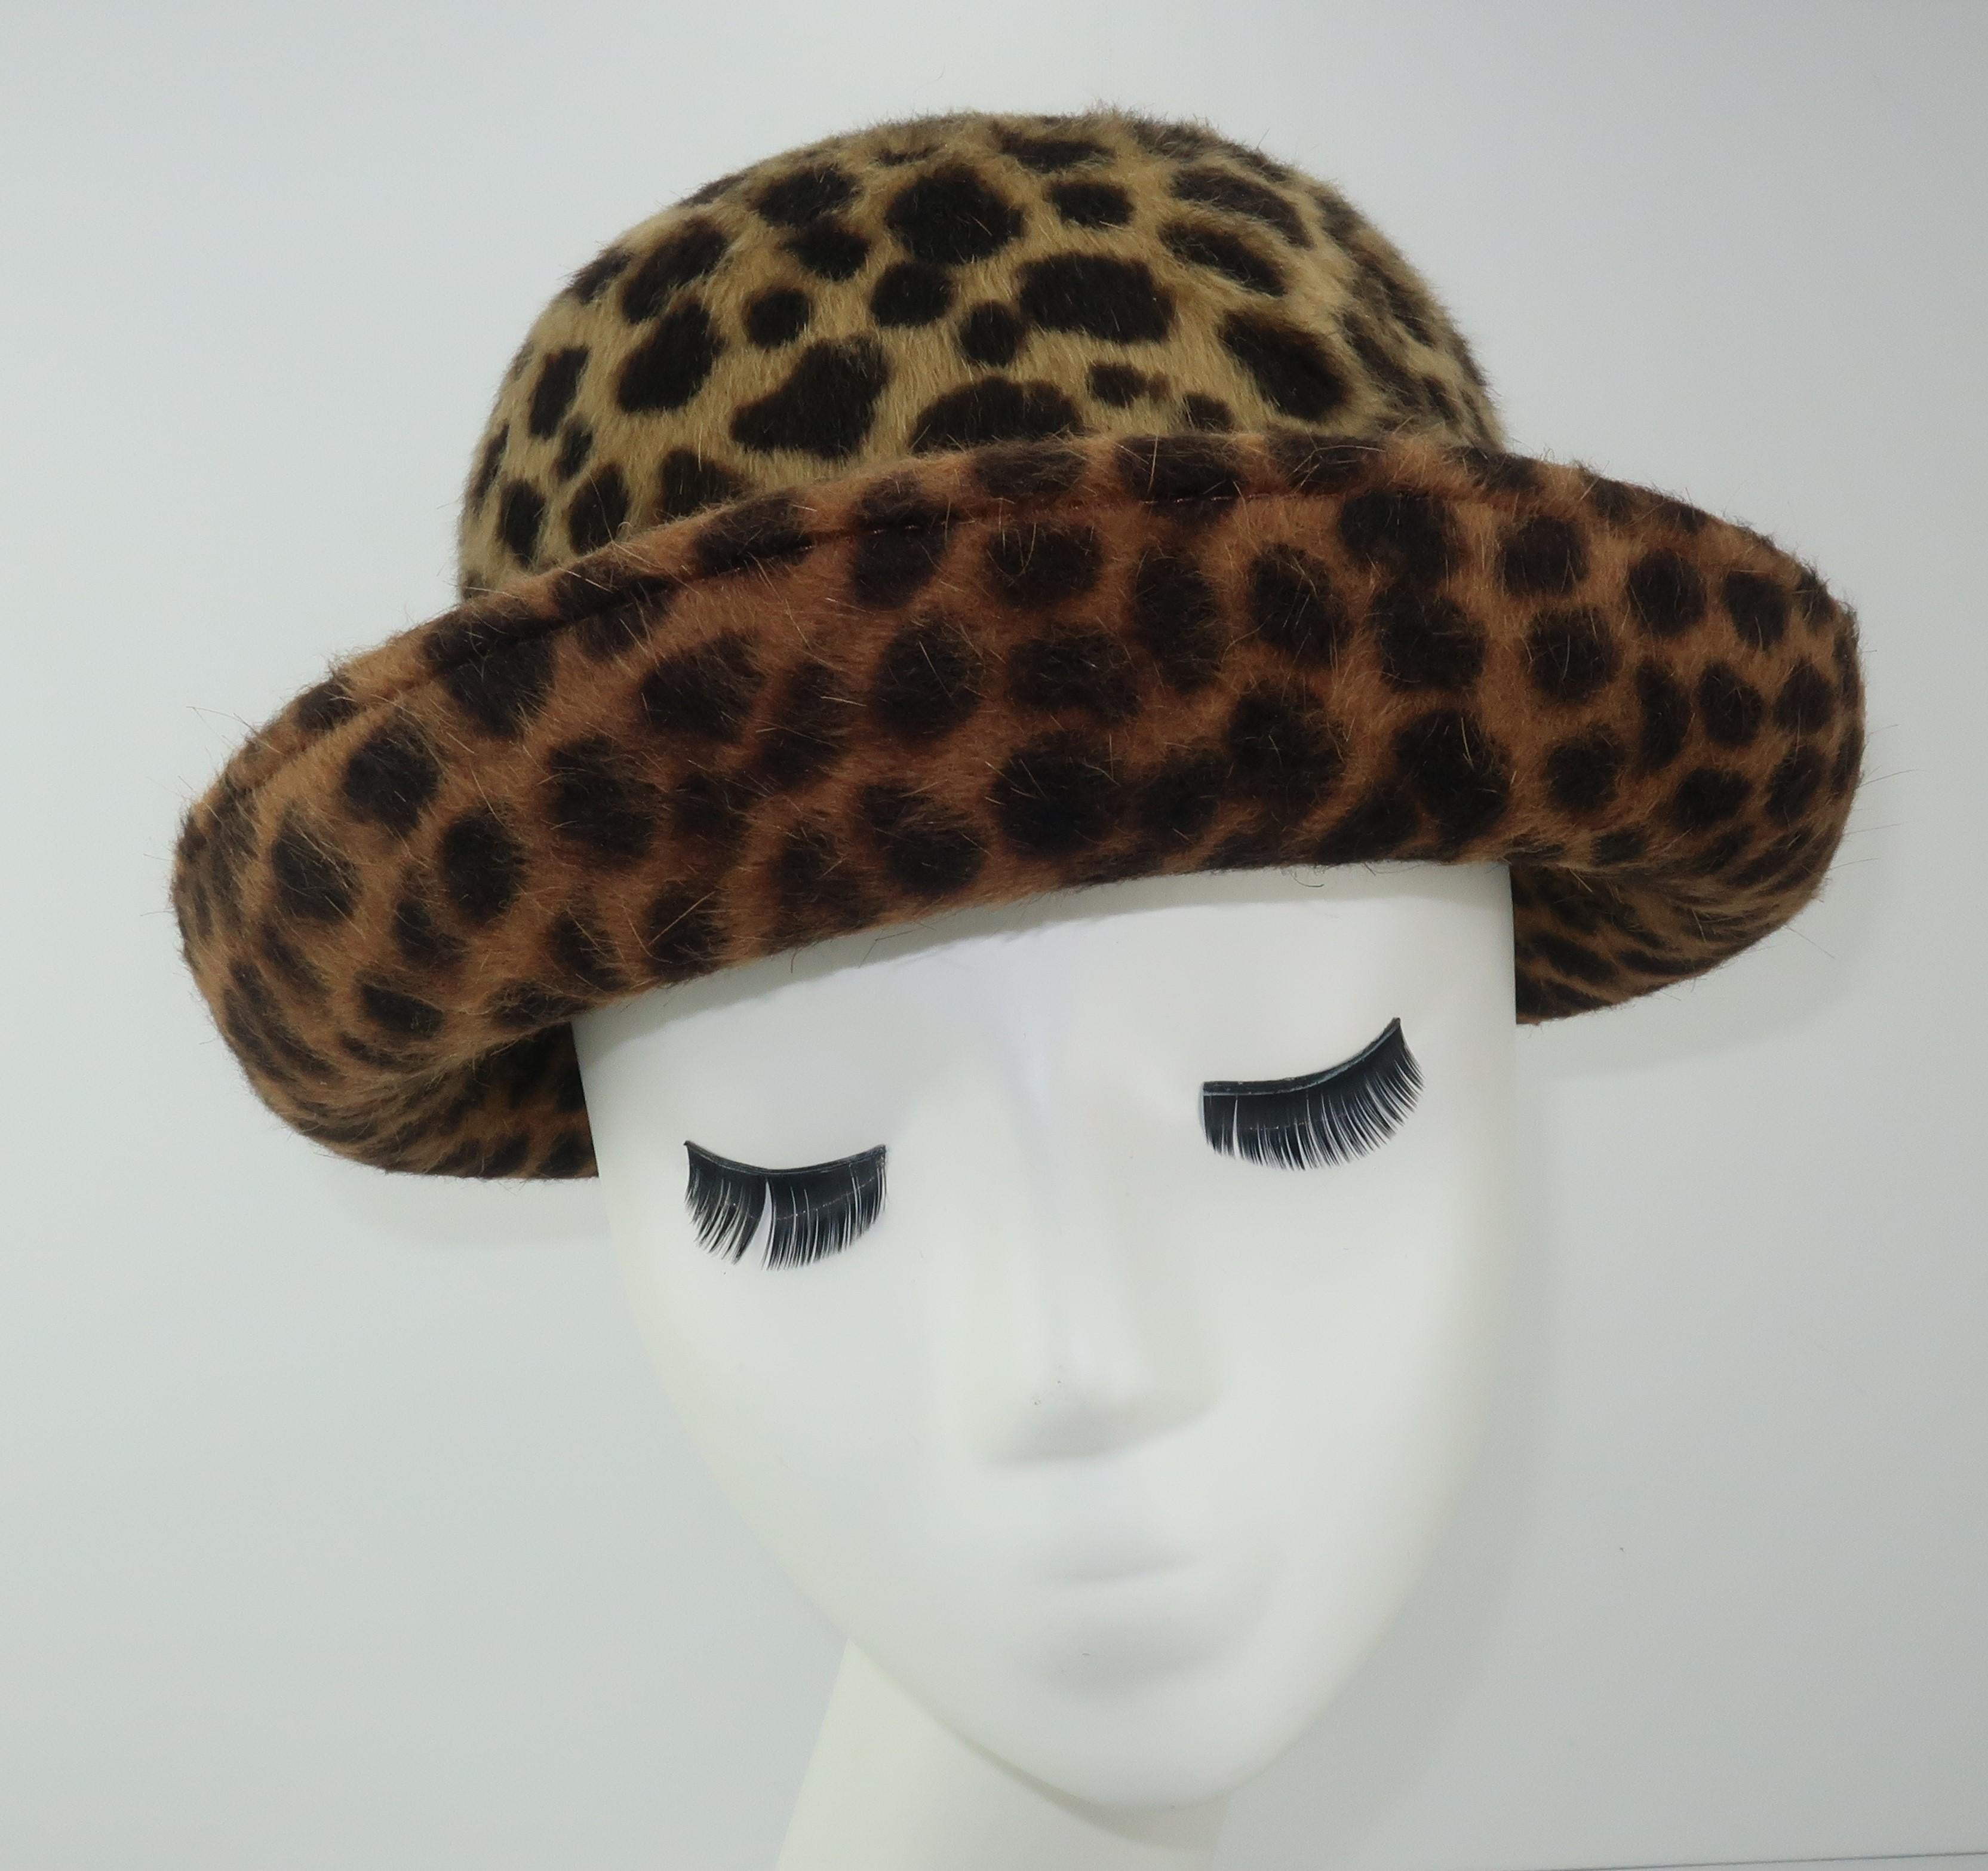 A bowler hat silhouette from Eric Javits with an animal print mohair in shades of dark brown to light camel.  It has a gradient pattern from crown to brim creating a subtle color shift from light to dark framing the face.  Eric Javits toppers are